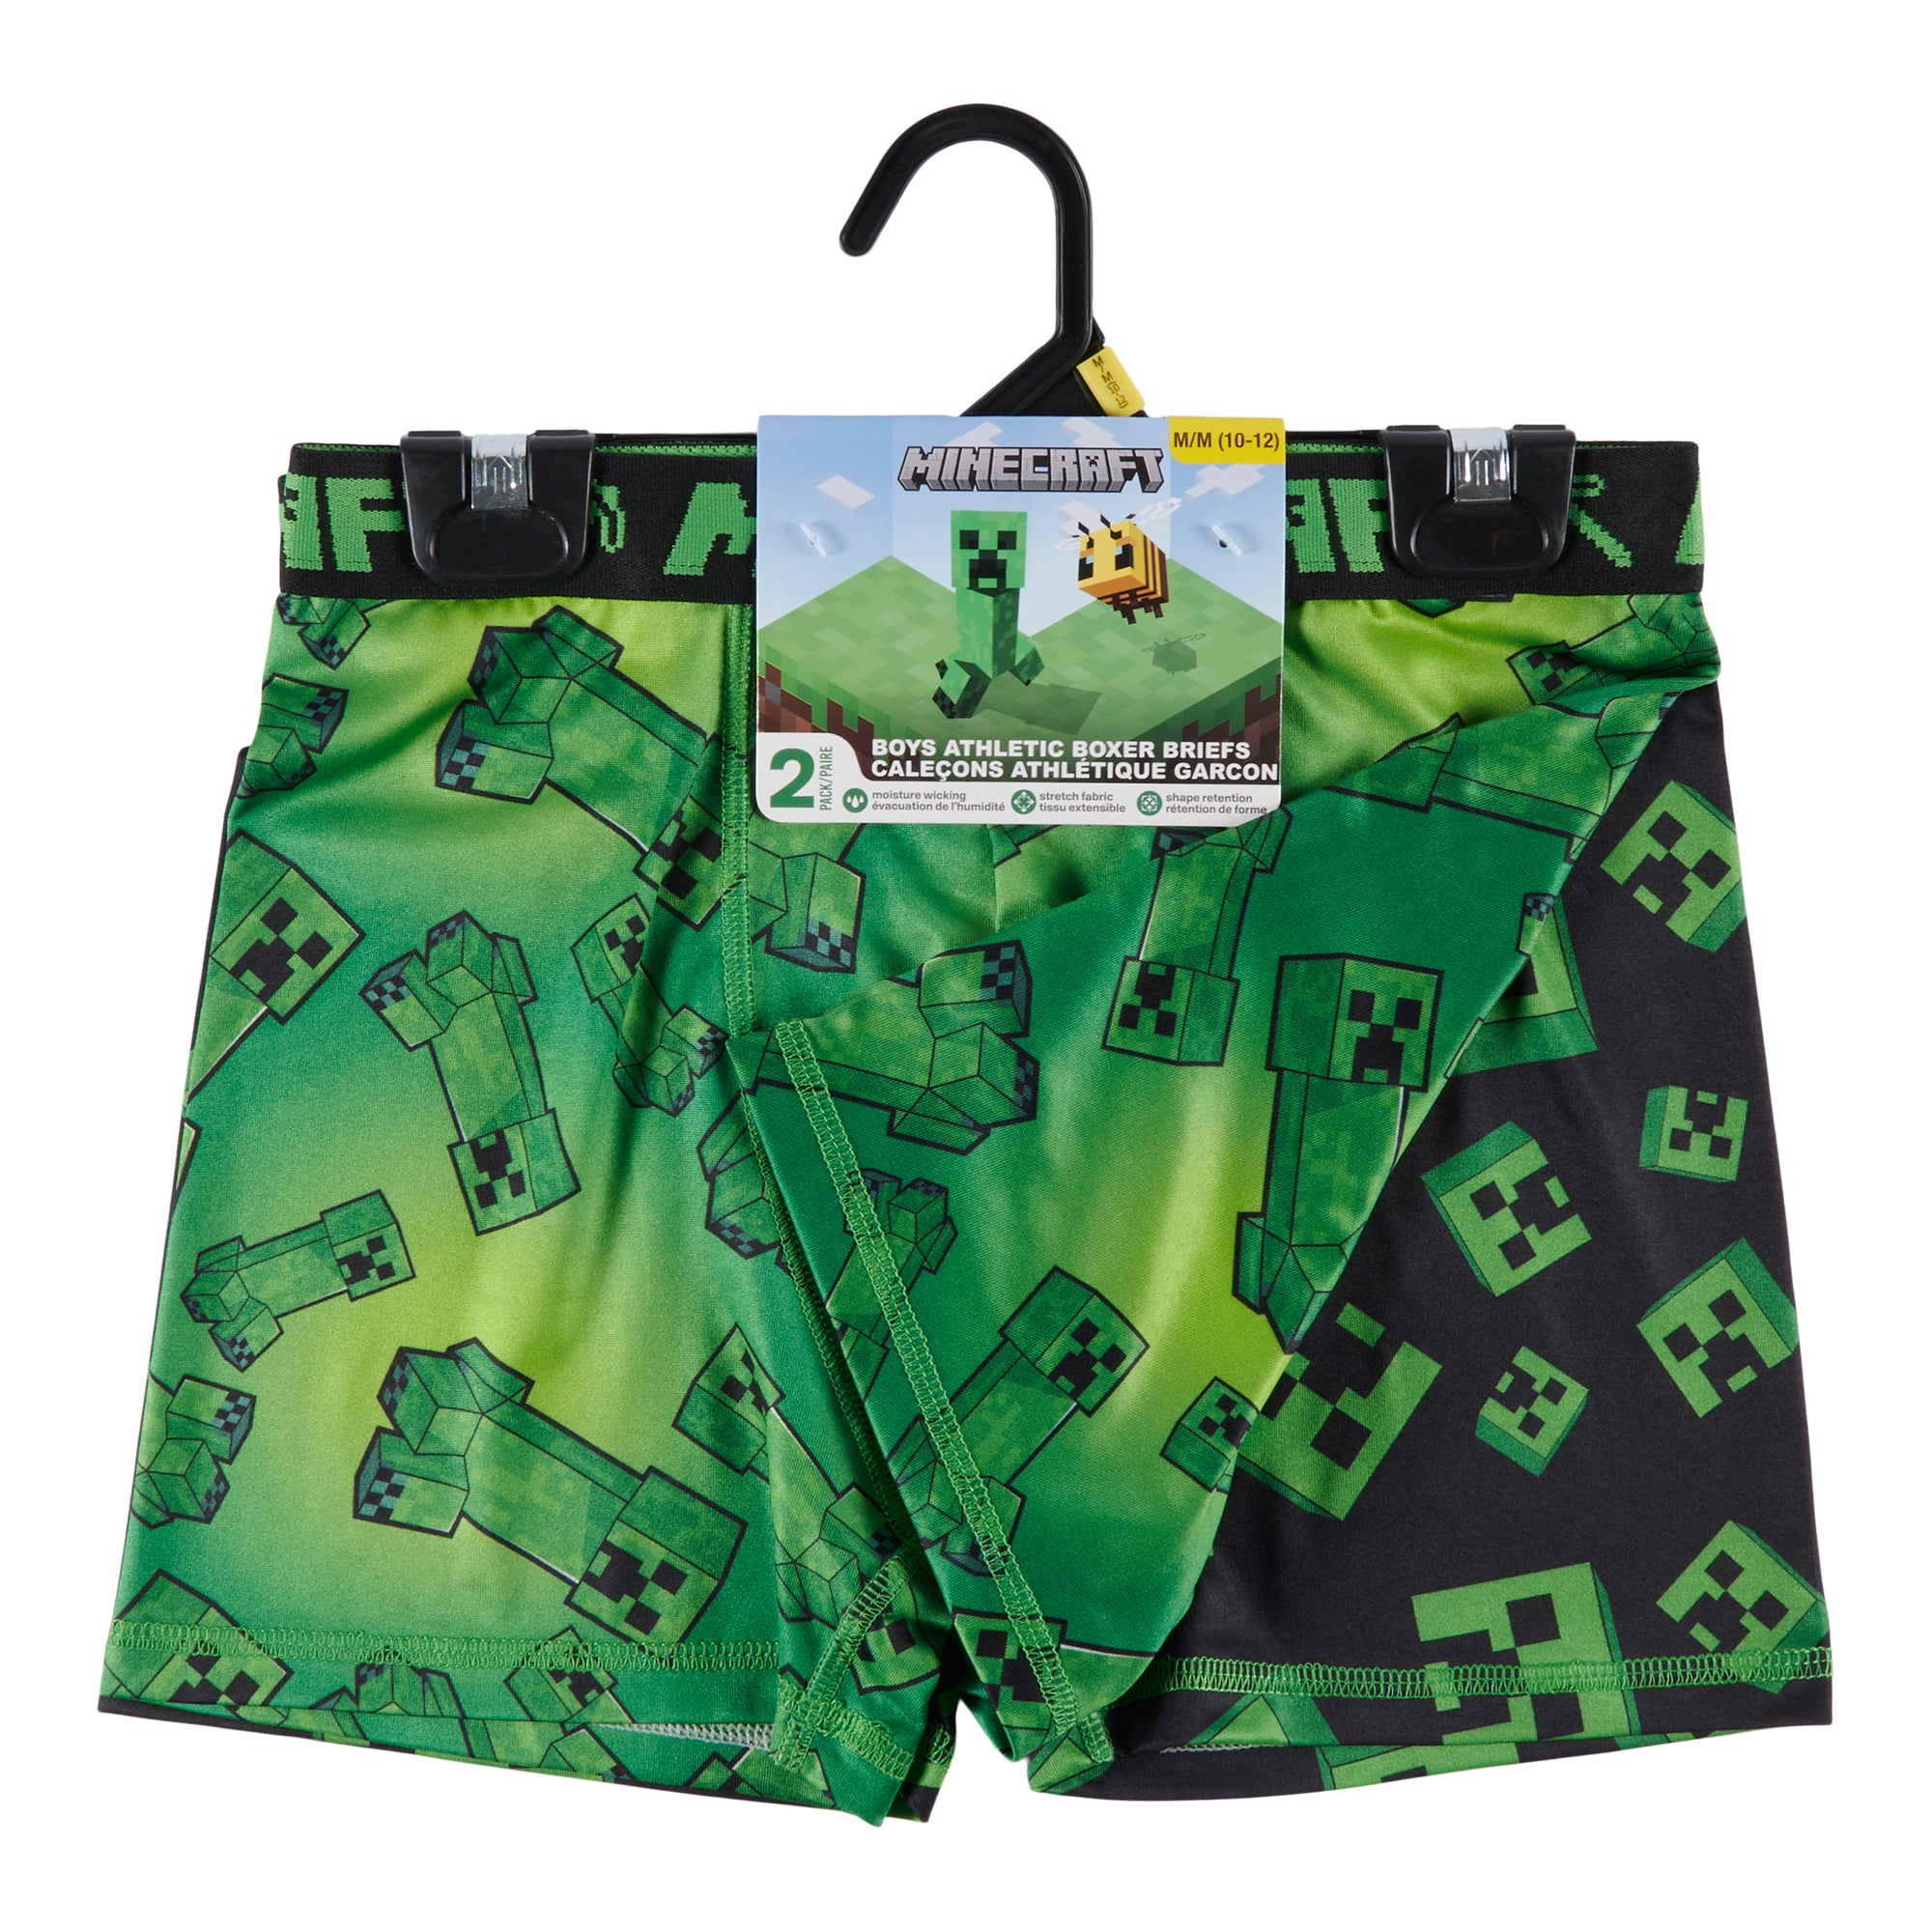 Minecraft 2 Pack Boy's Boxers, Sizes: XS-L 